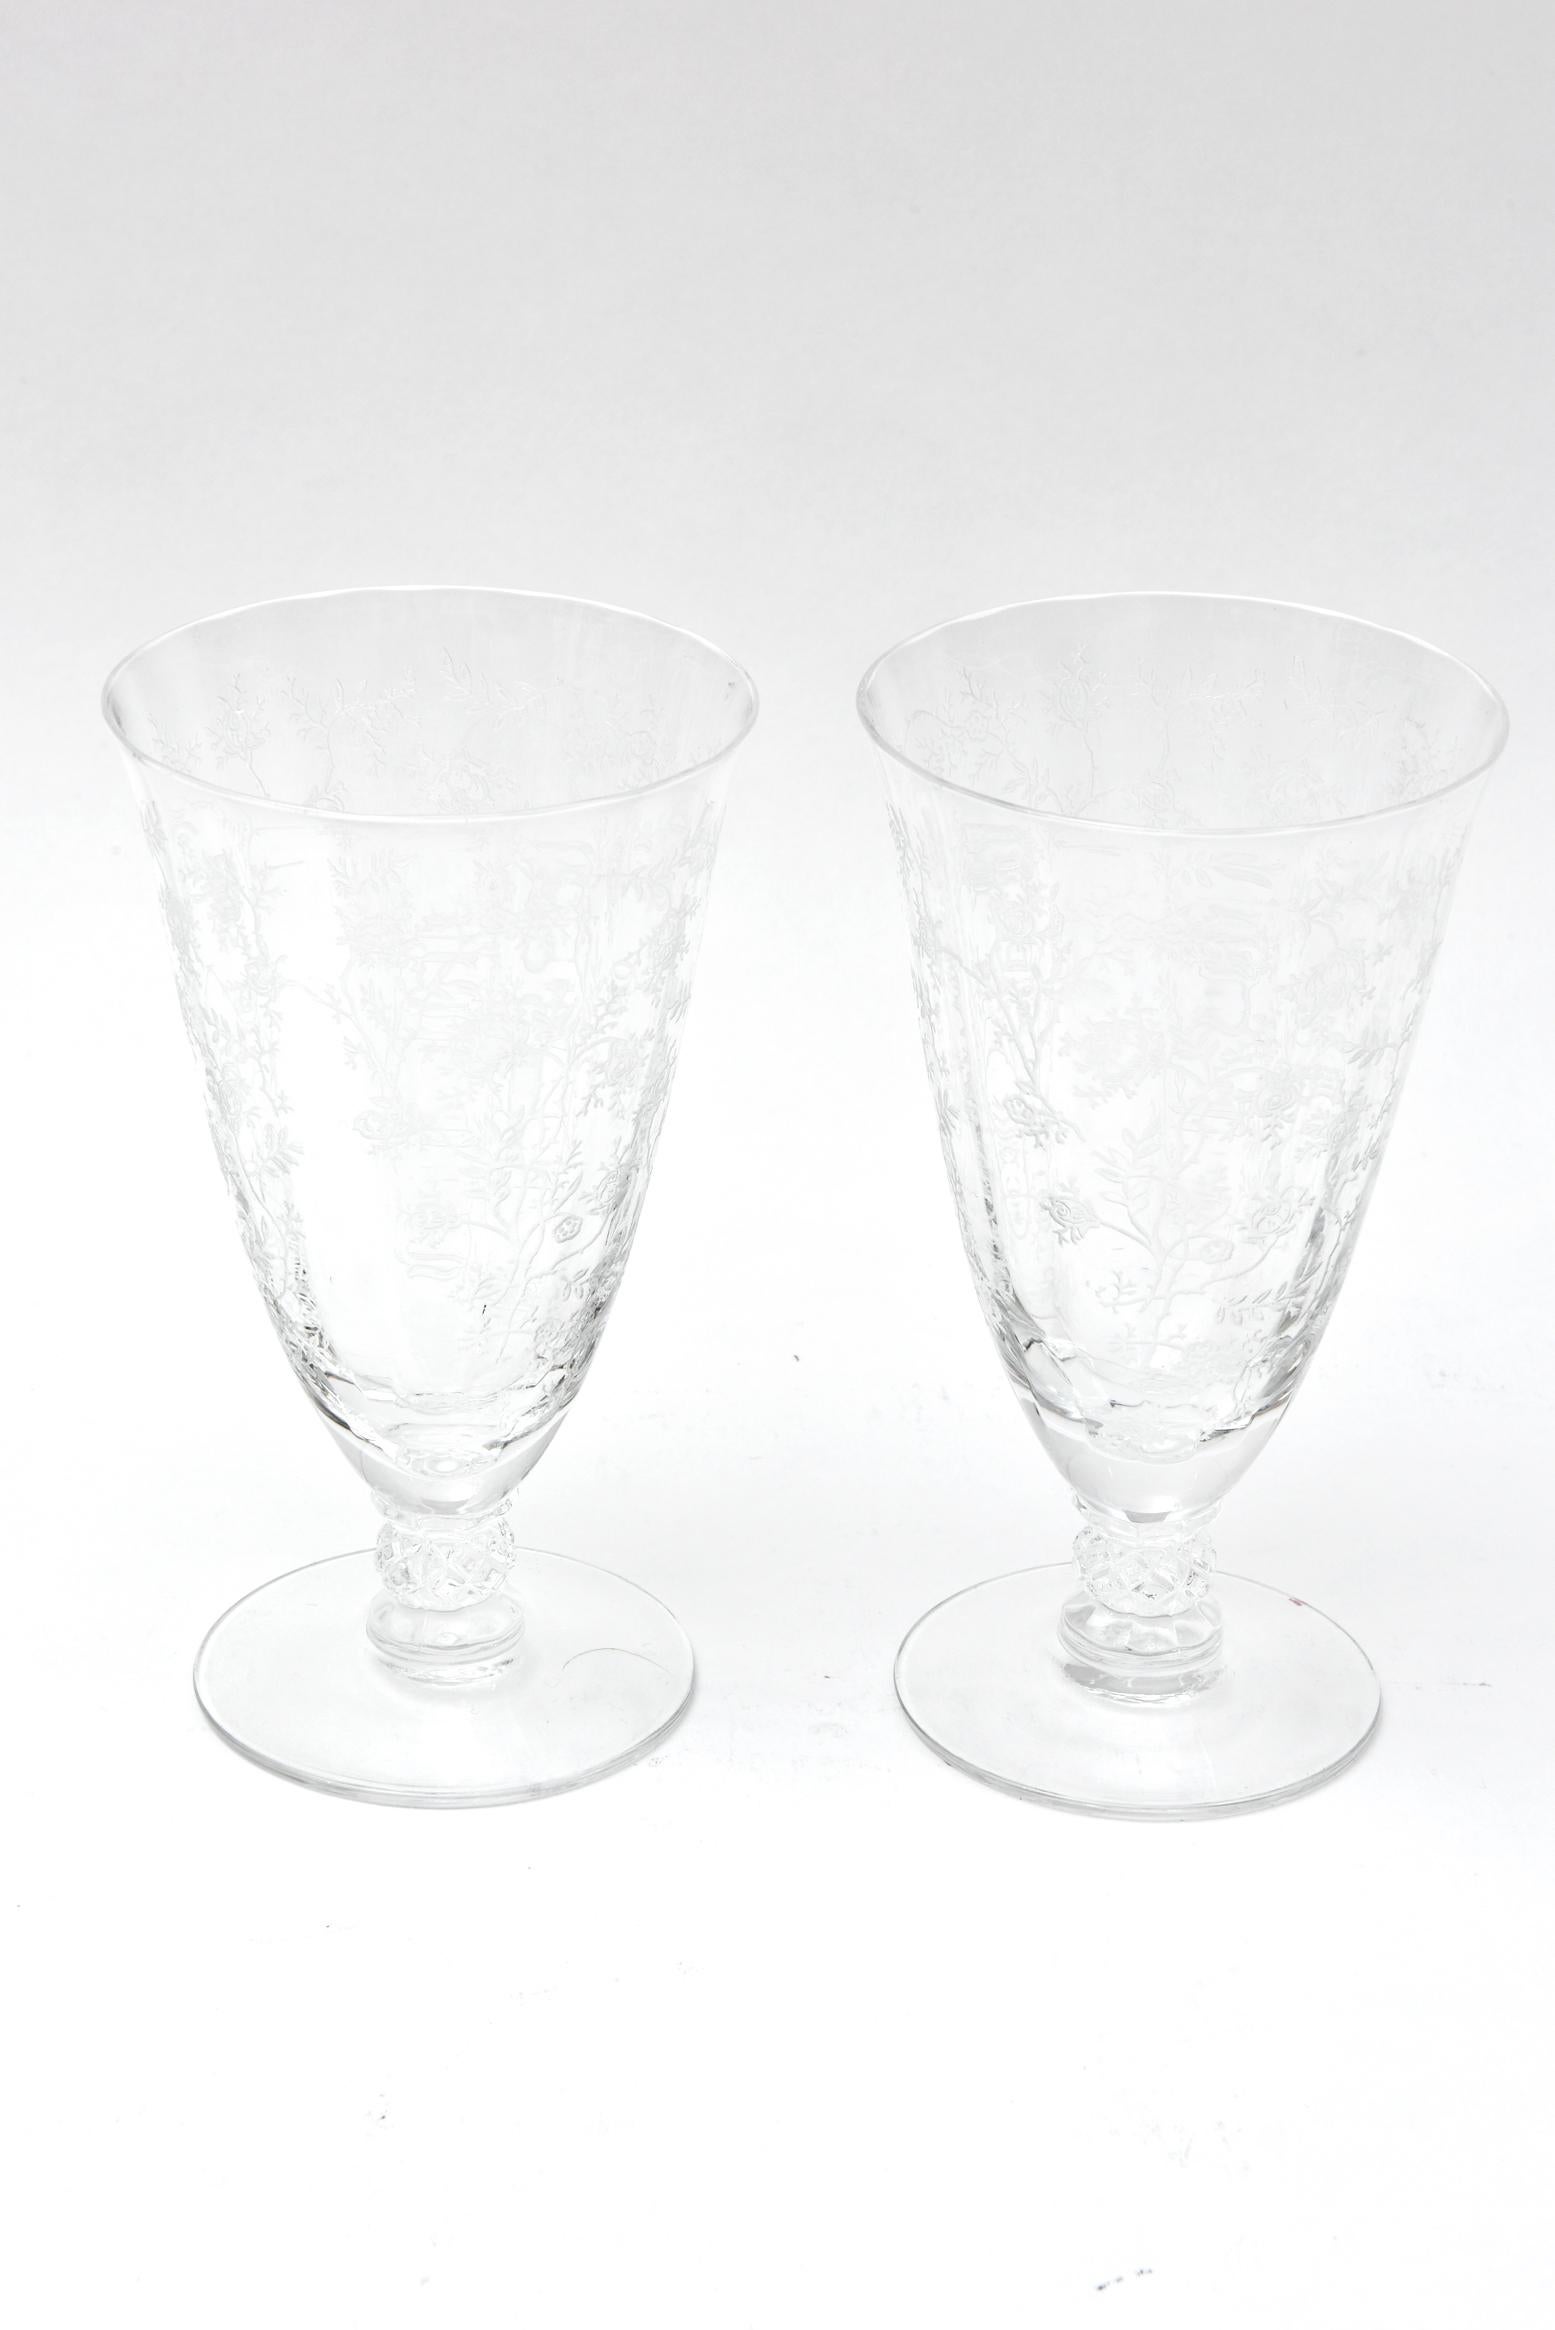 A great set of American crystal with nice etched floral detail to the bowls of the goblet and a very pretty knob jewel stem. Crisp clear glass and nice proportions. Perfect to mix and match in with all your Fine tabletop. Please see our other